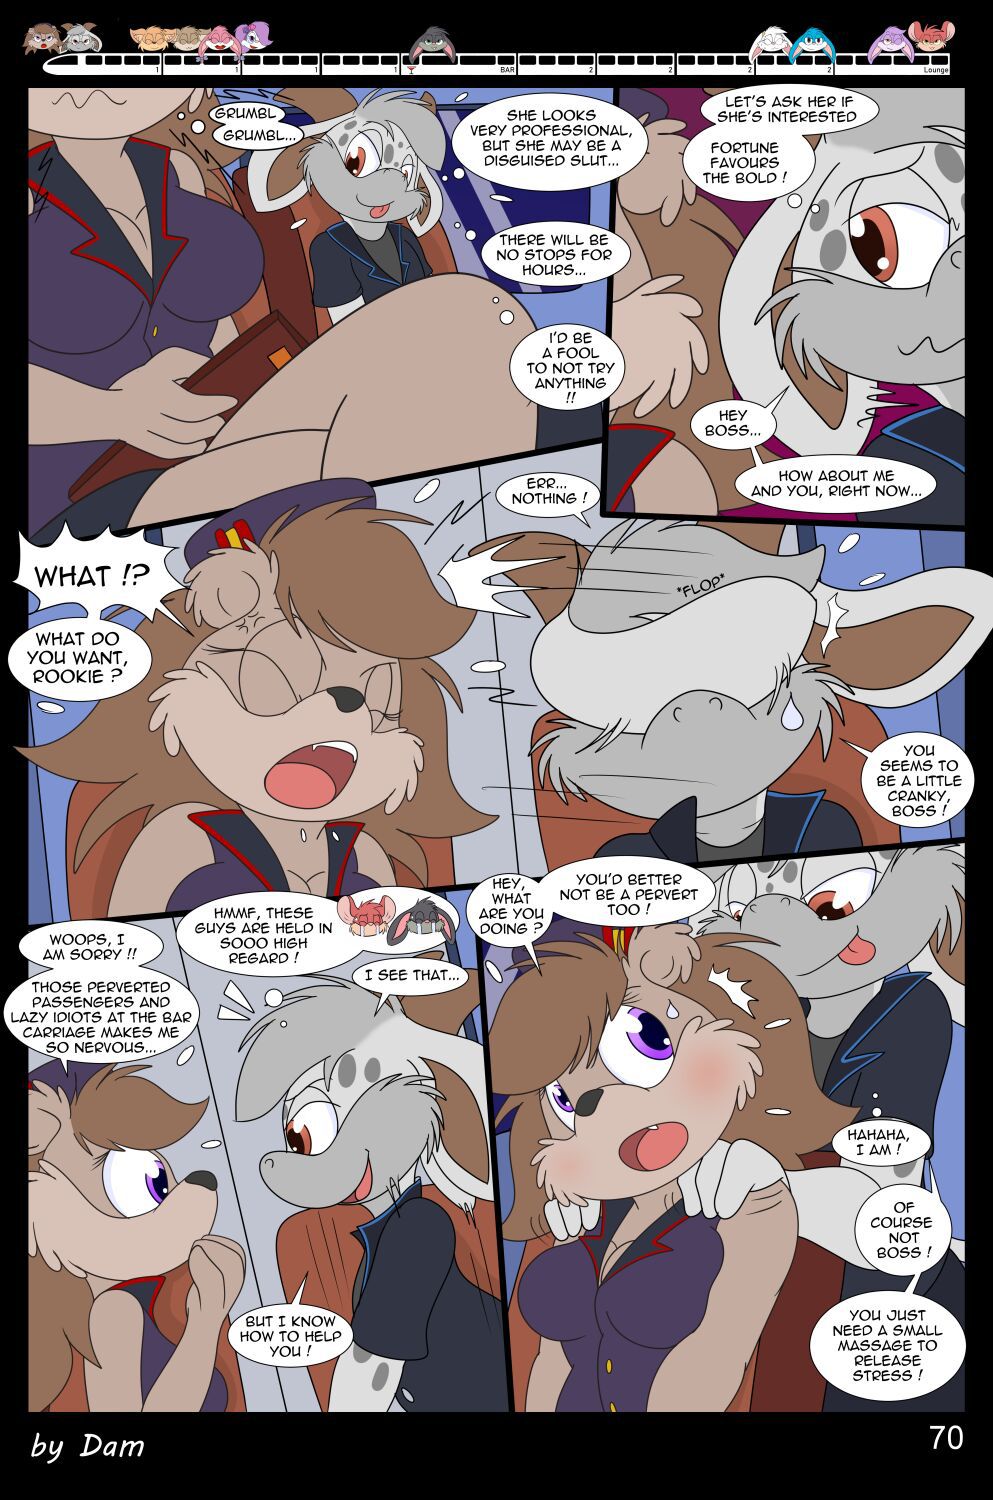 [Dam] Toons on a train [Ongoing] 70